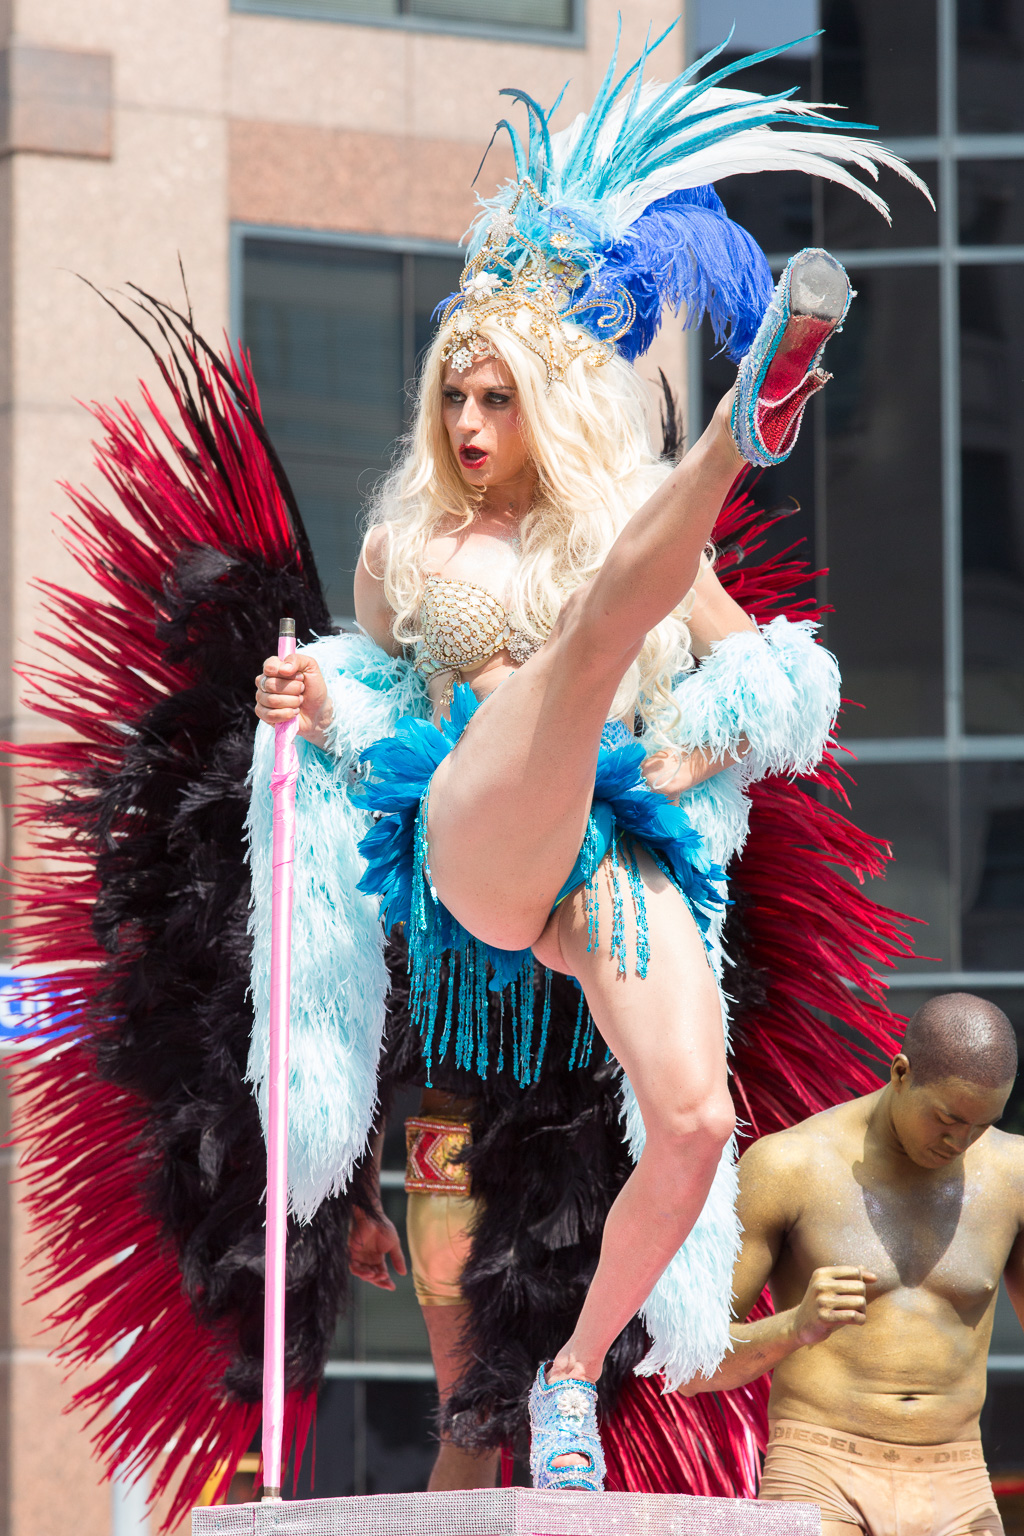 A person dressed in drag does a high kick.